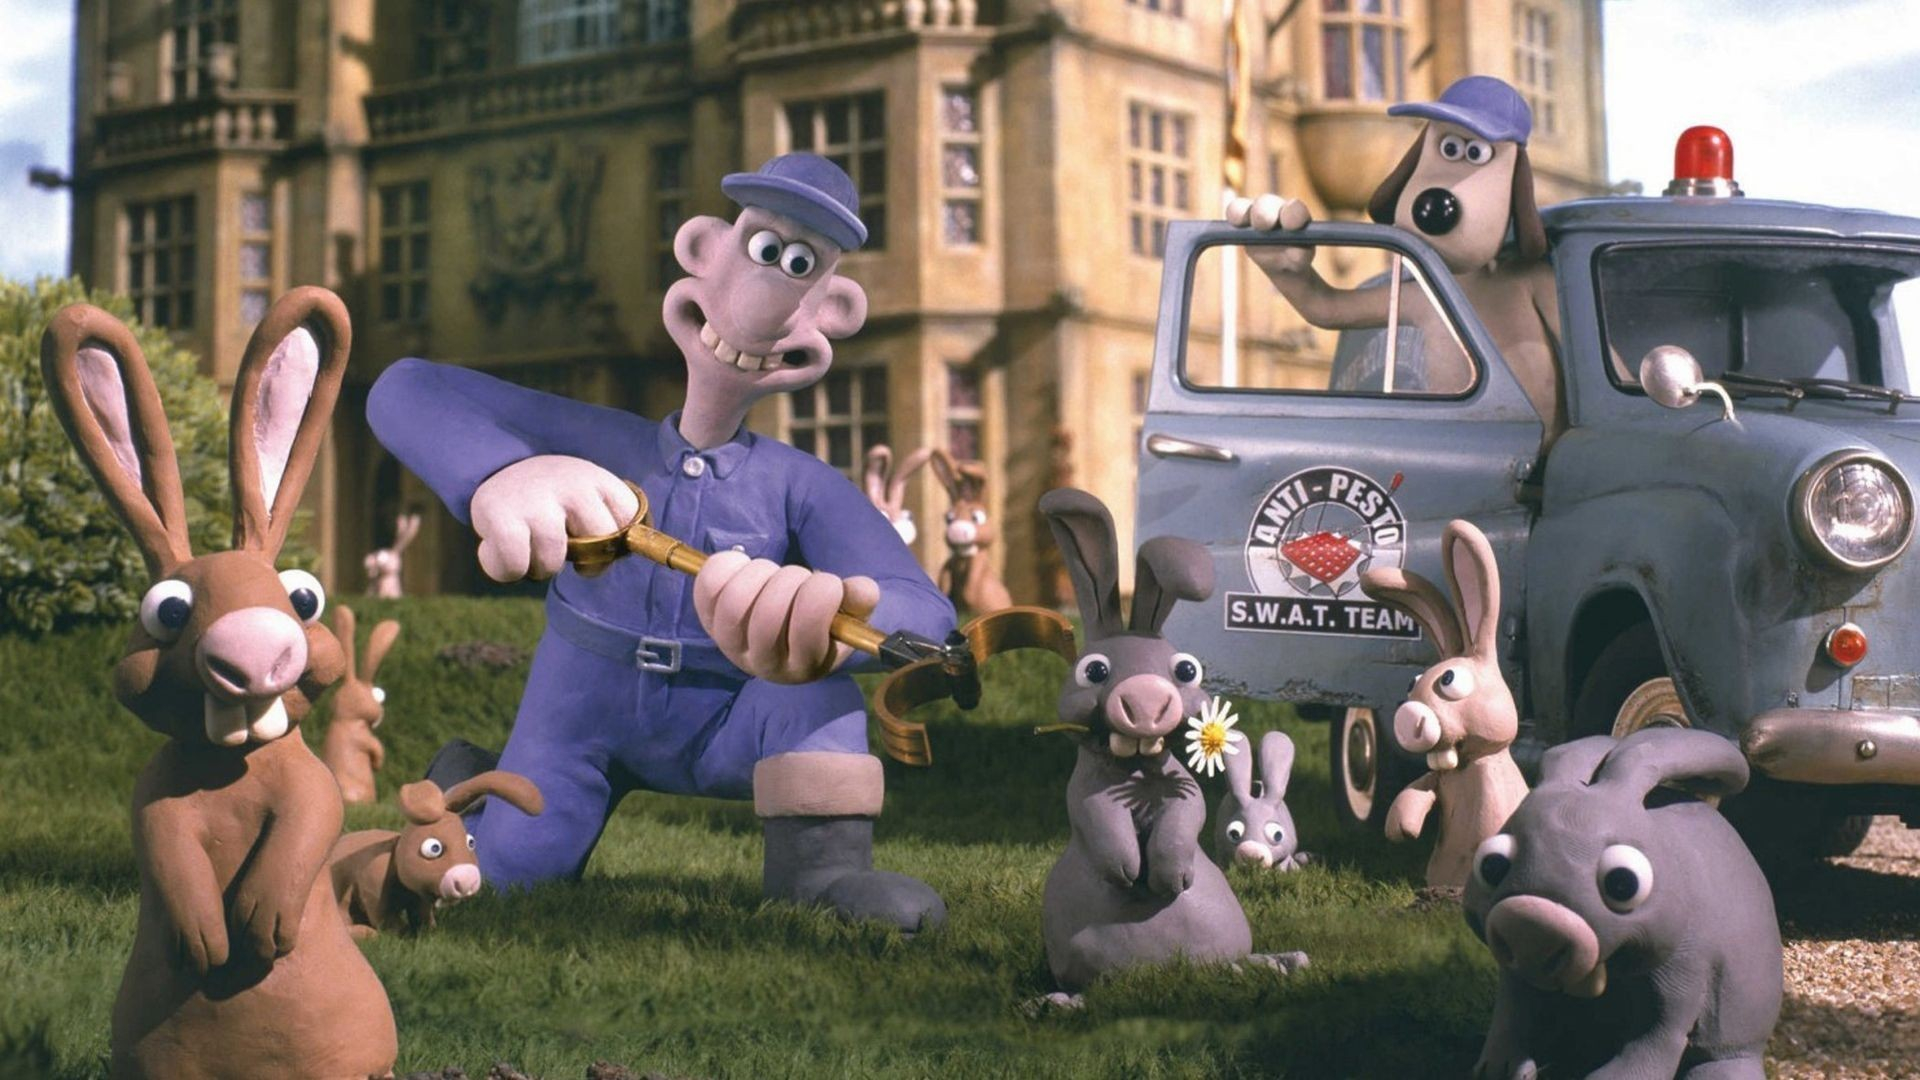 1920x1080 Wallace \u0026 Gromit: The Curse of the Were-Rabbit HD Wallpaper